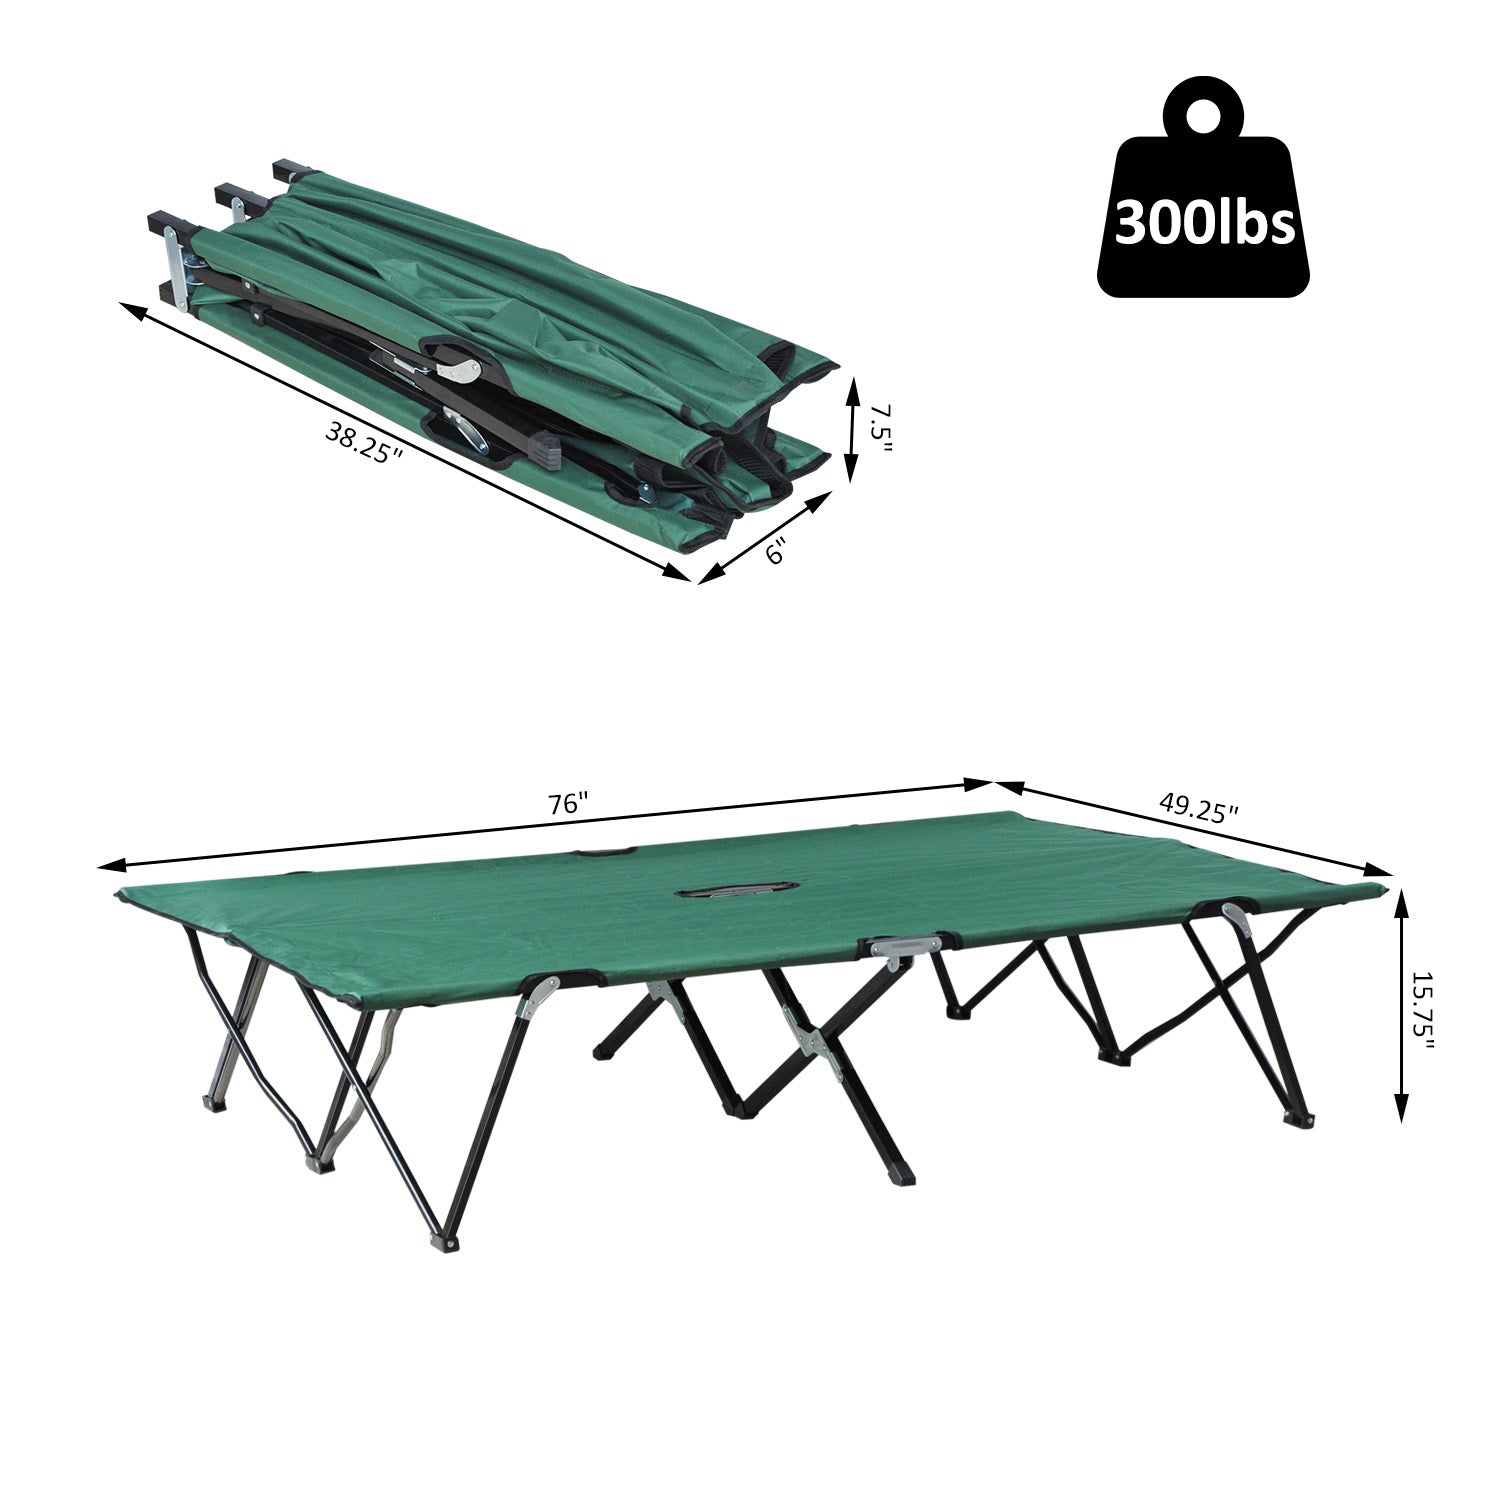 76" Two Person Folding Camping Cot Outdoor Portable Double Cot Wide Military Sleeping Bed w/ Carrying Bag Green at Gallery Canada